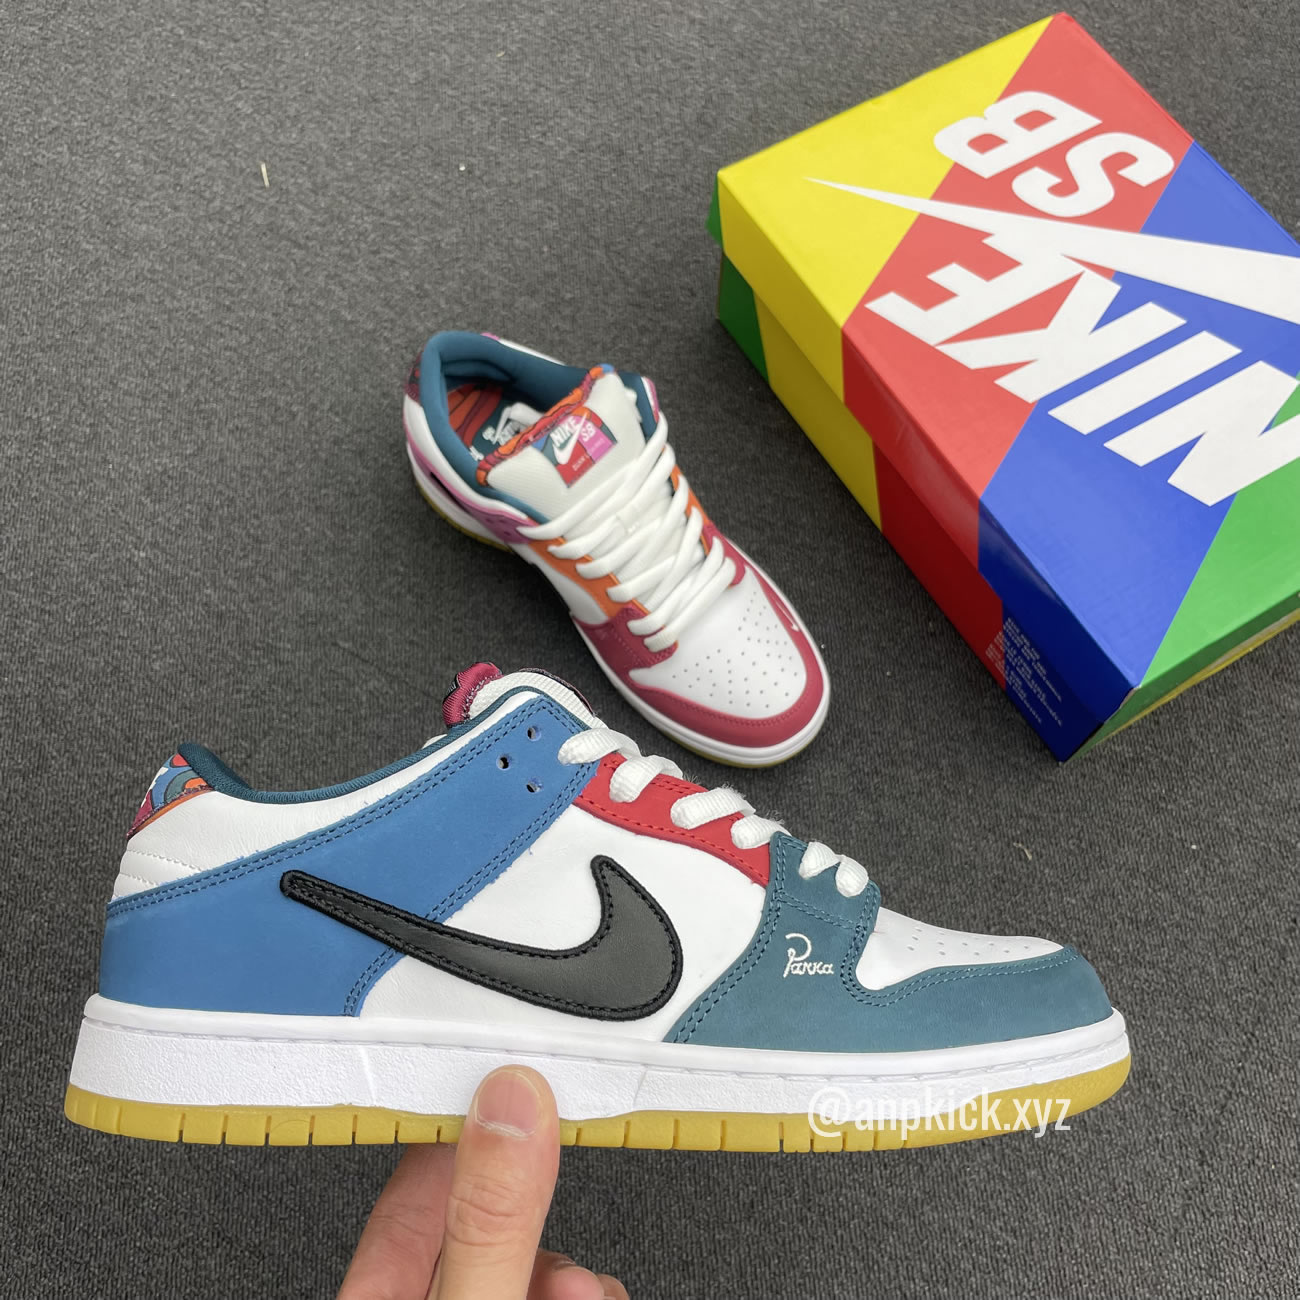 Parra Nike Sb Dunk Low Collab Summer 2021 Colorway Surfaces Dh7695 100 (1) - newkick.org